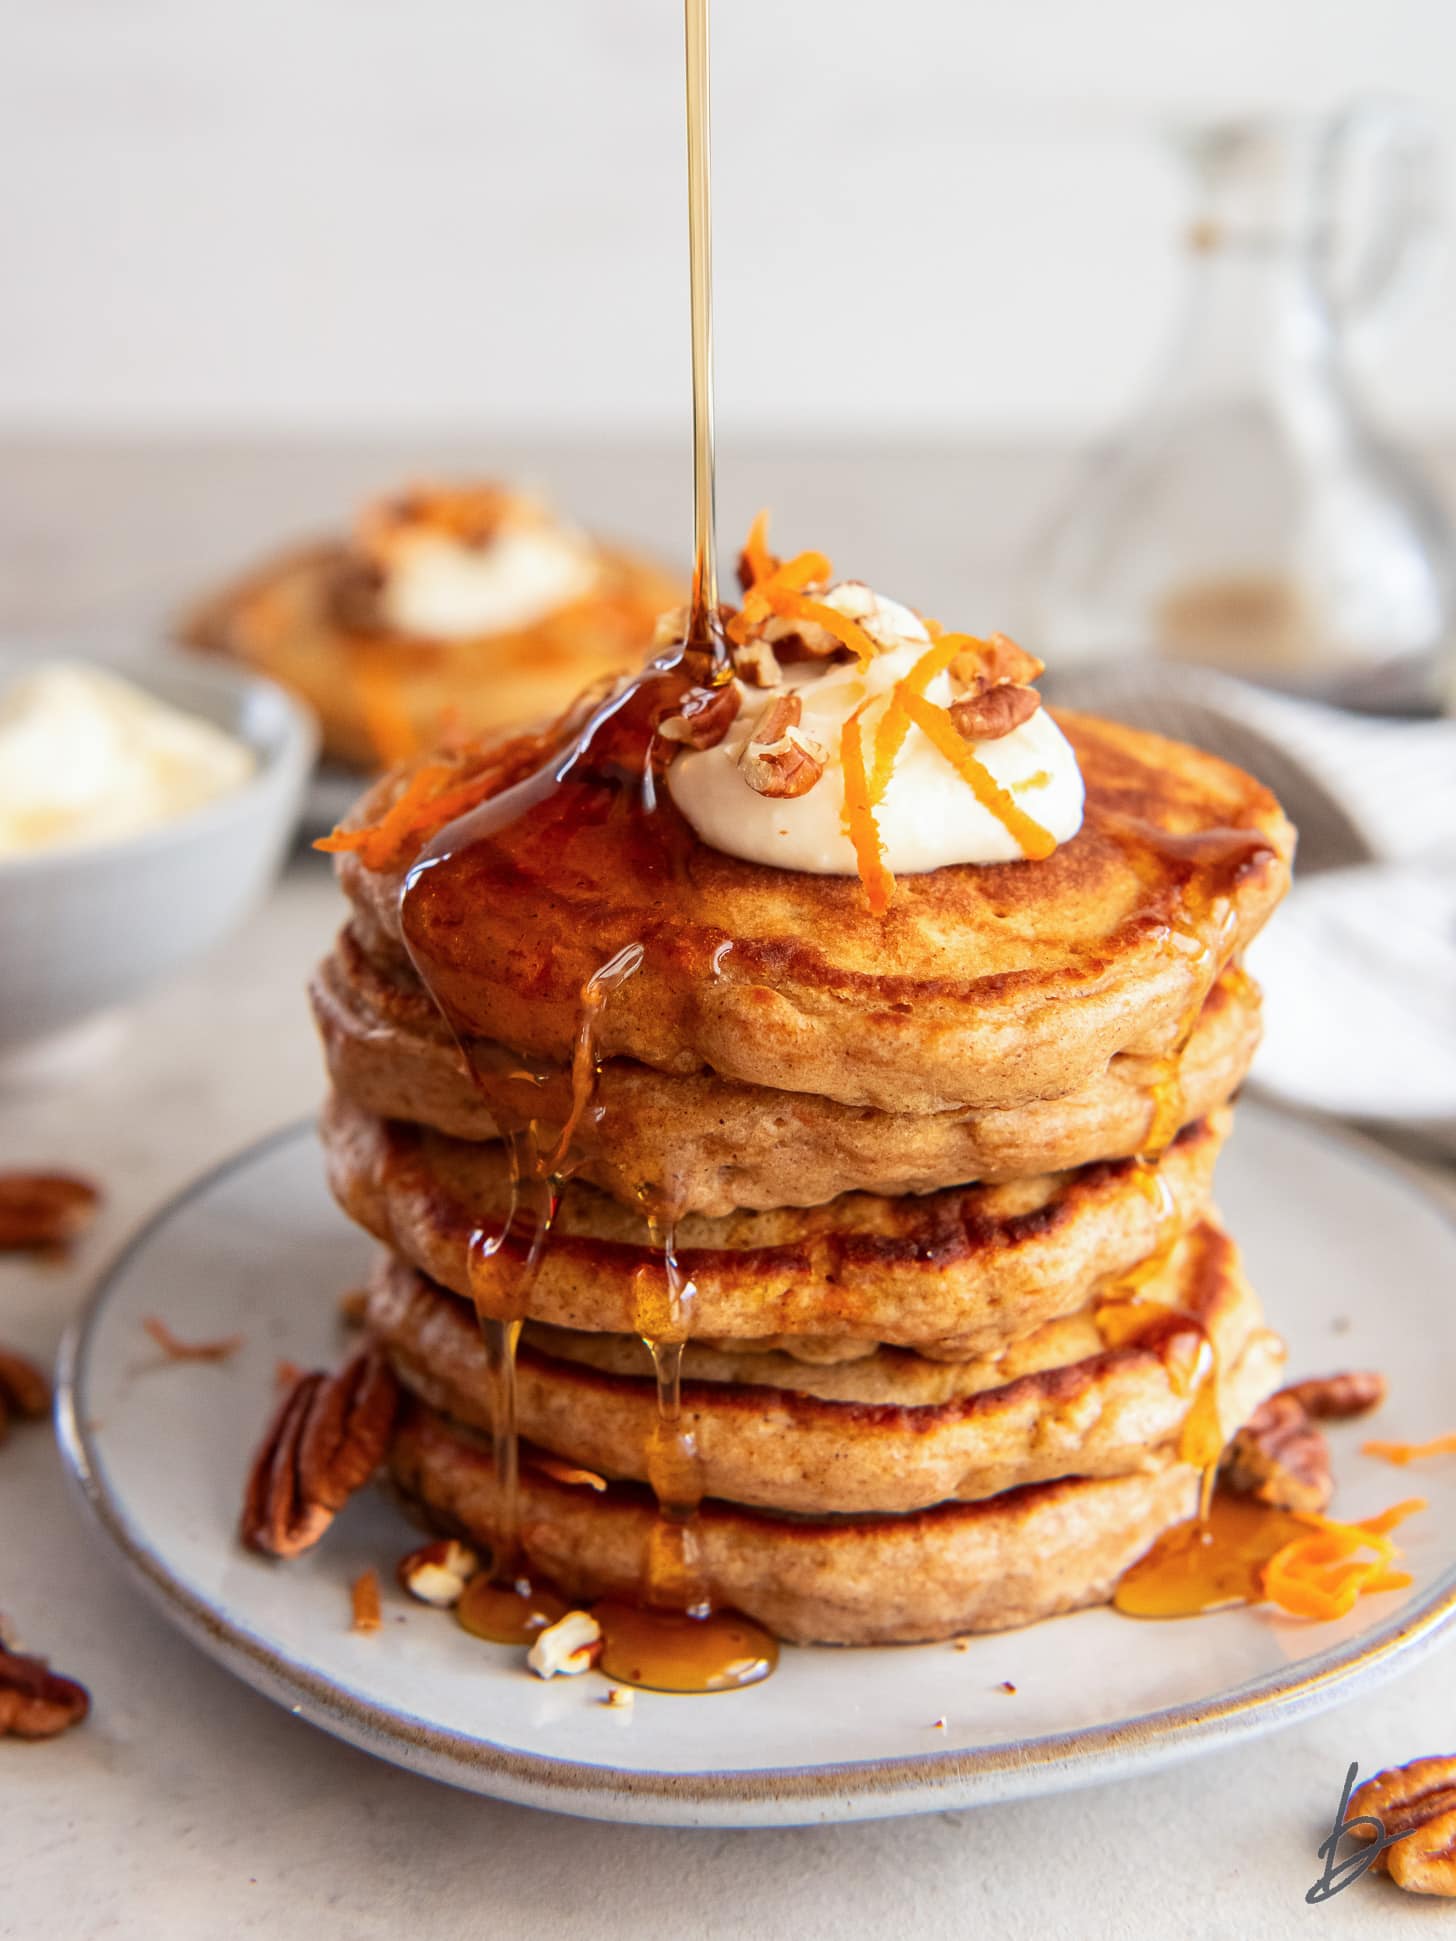 maple syrup poured on top and drizzling down a stack of carrot cake pancakes on a plate.